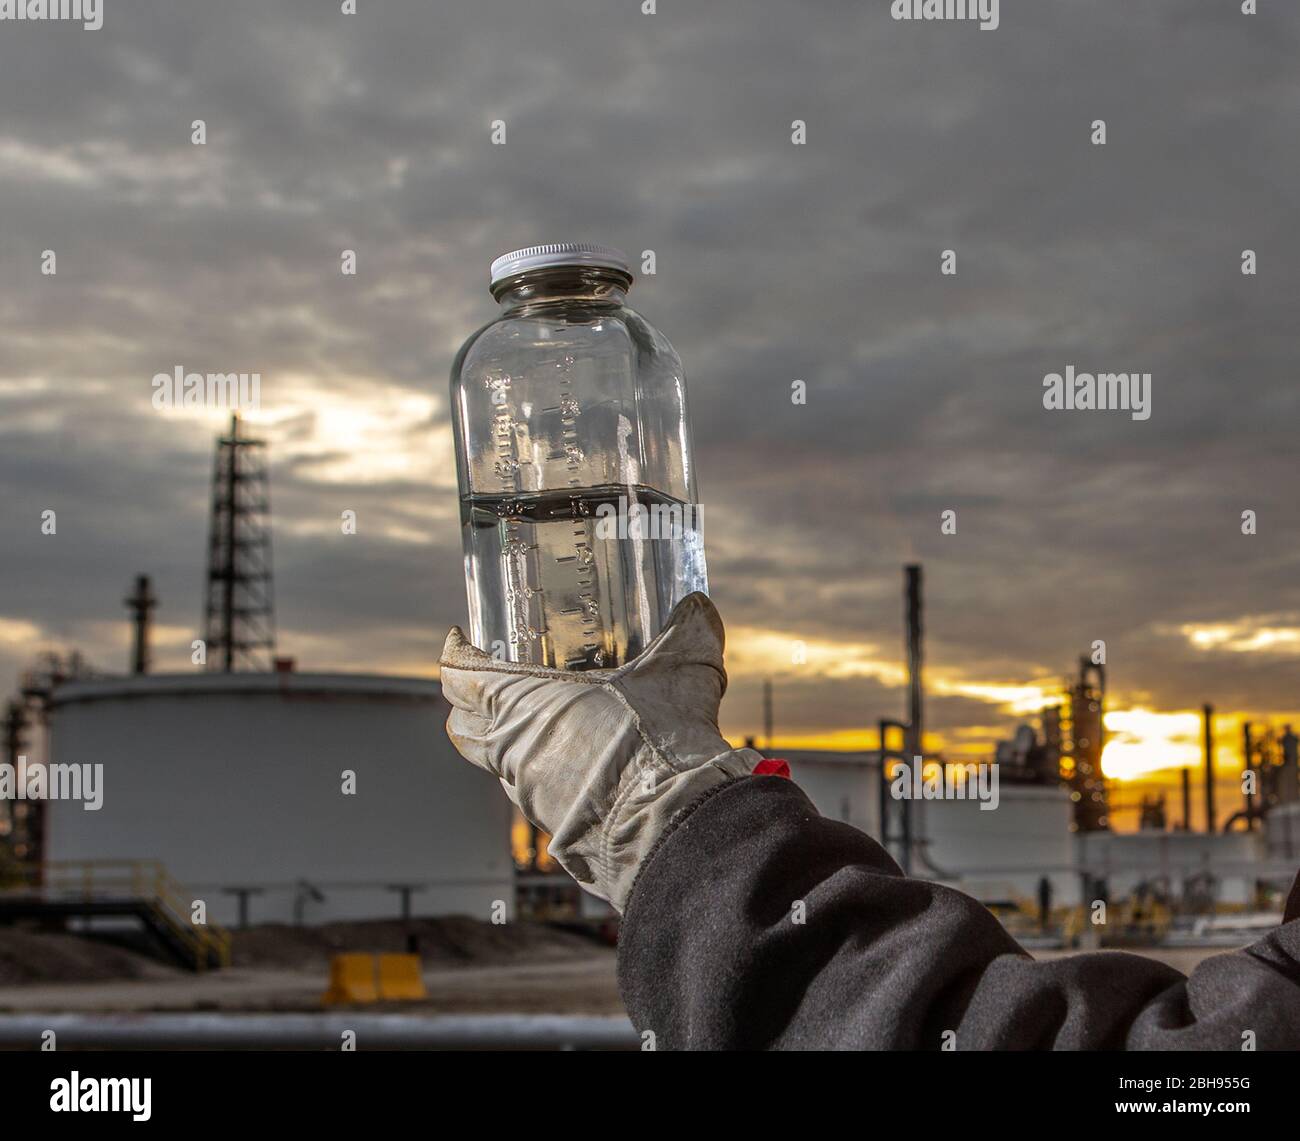 Chemical sample taken at refinery Stock Photo